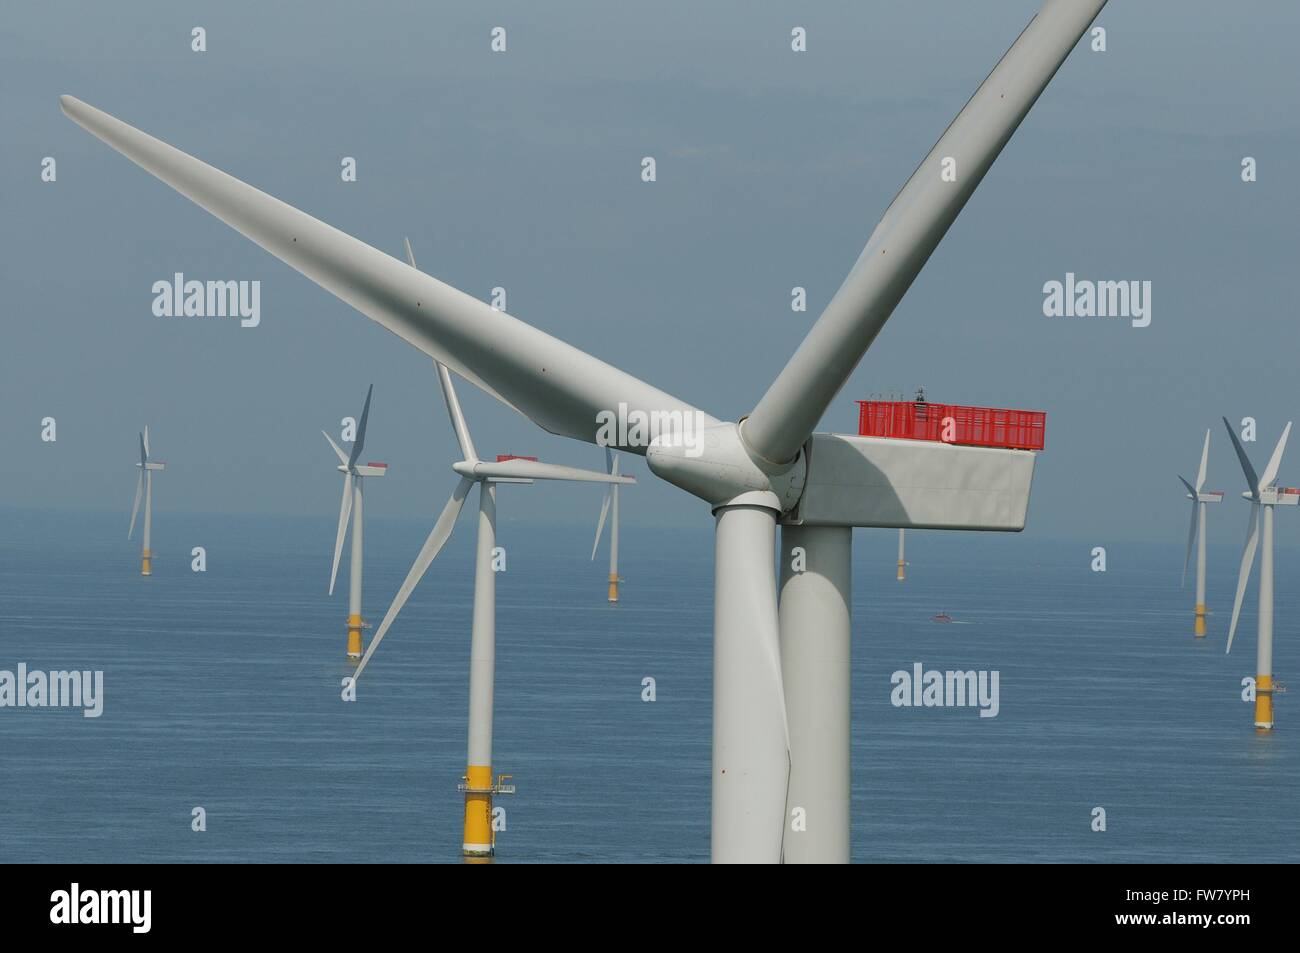 Offshore wind turbines at the Greater Gabbard wind farm off the coast of Suffolk, England. The alternative energy project was completed in 2012 at a cost of $2 billion dollars. Stock Photo